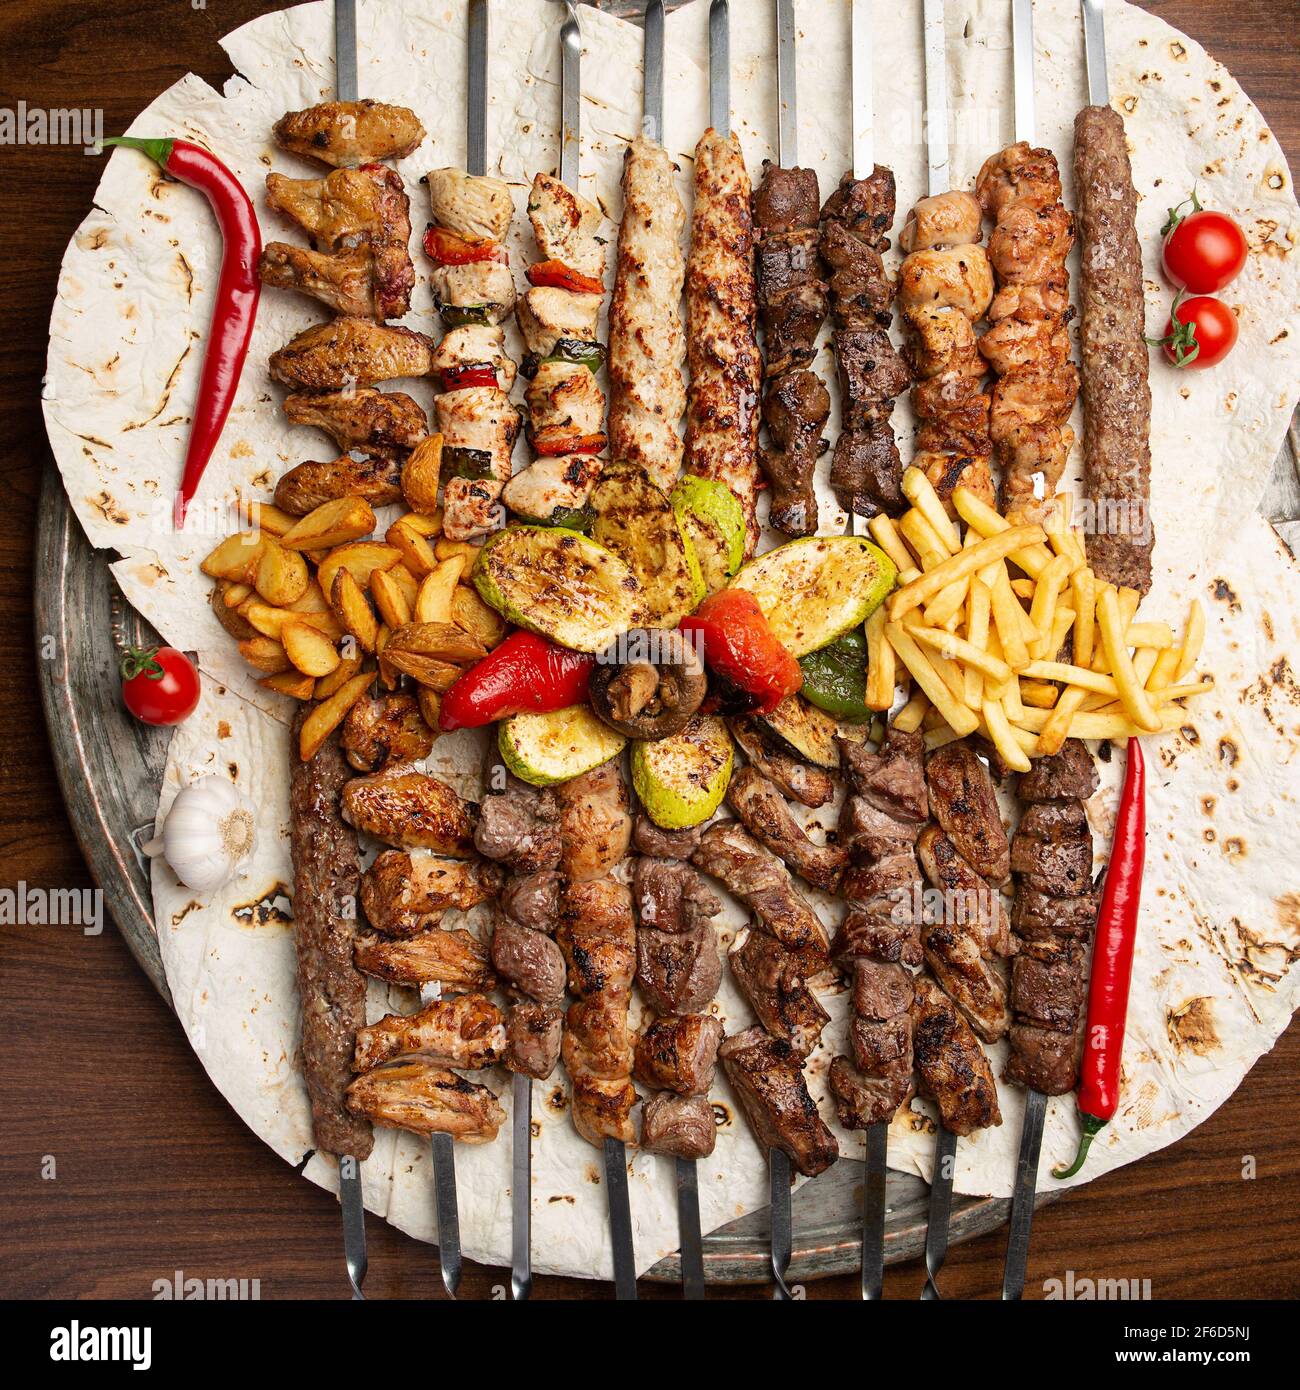 Assorted delicious grilled meat on skewers with vegetables and French fries on pita. Top view Stock Photo